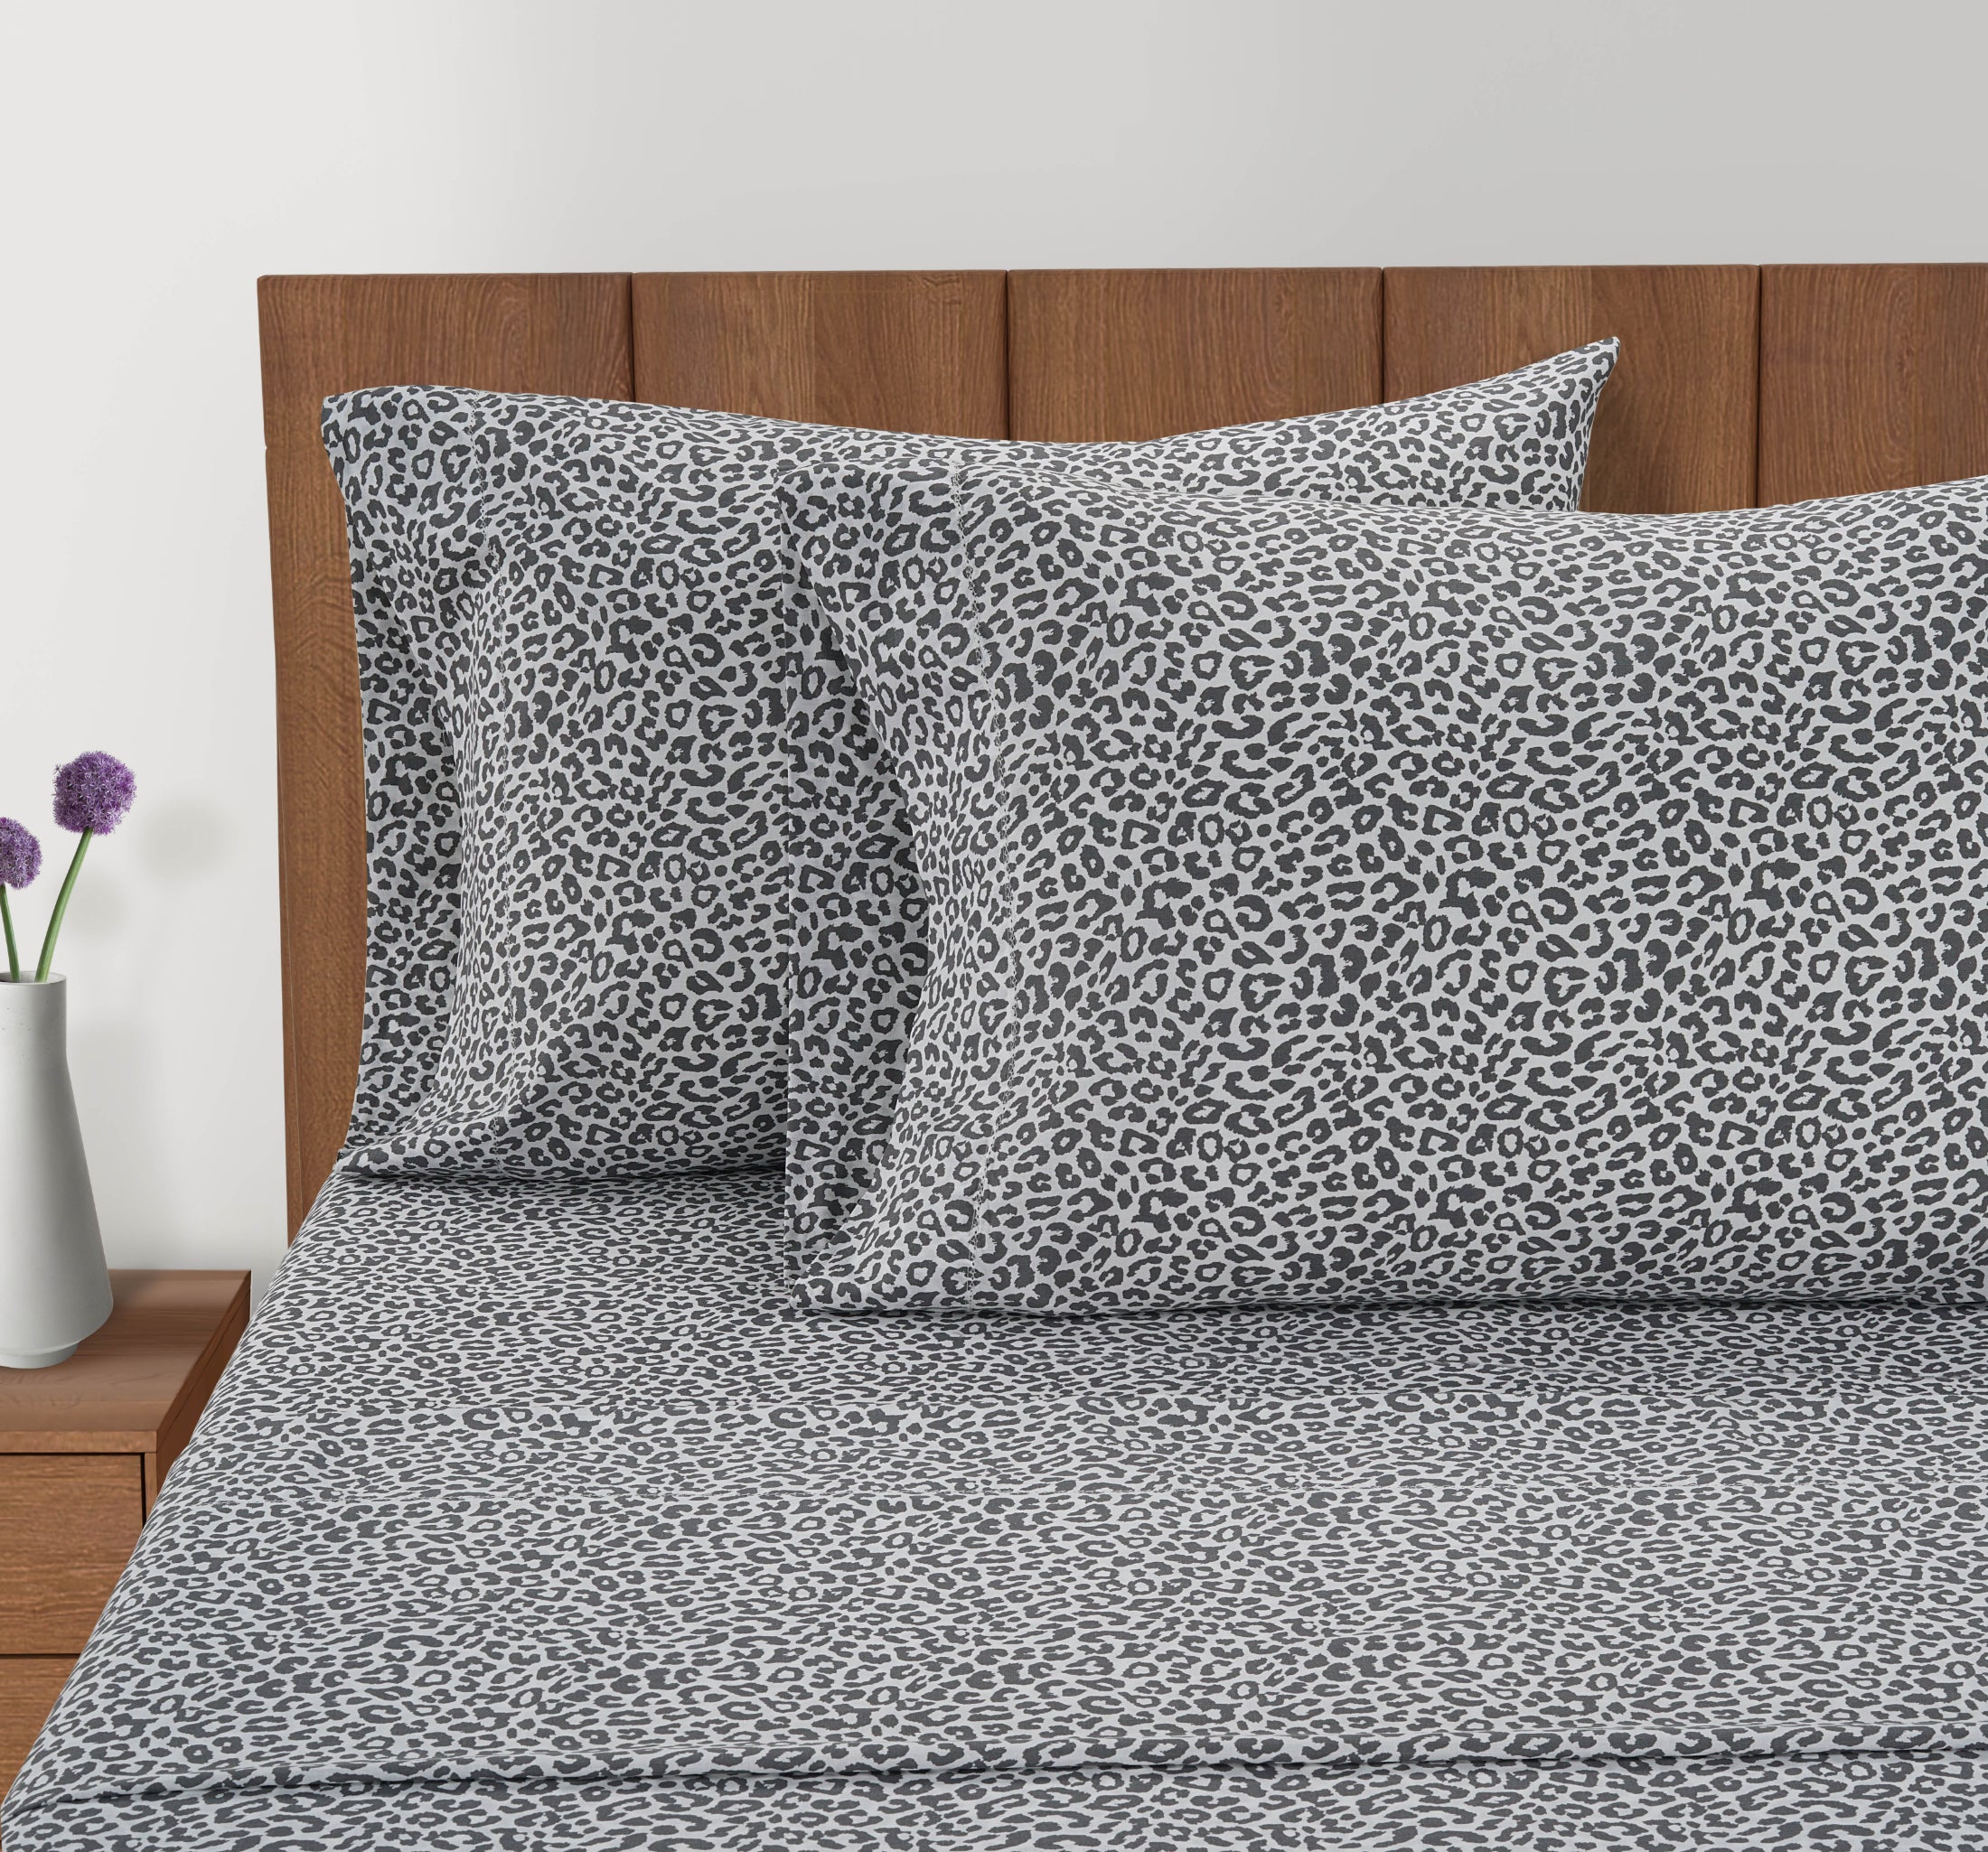 100% Organic Washed Cotton Quilt Cover Set - Cheetah Charcoal